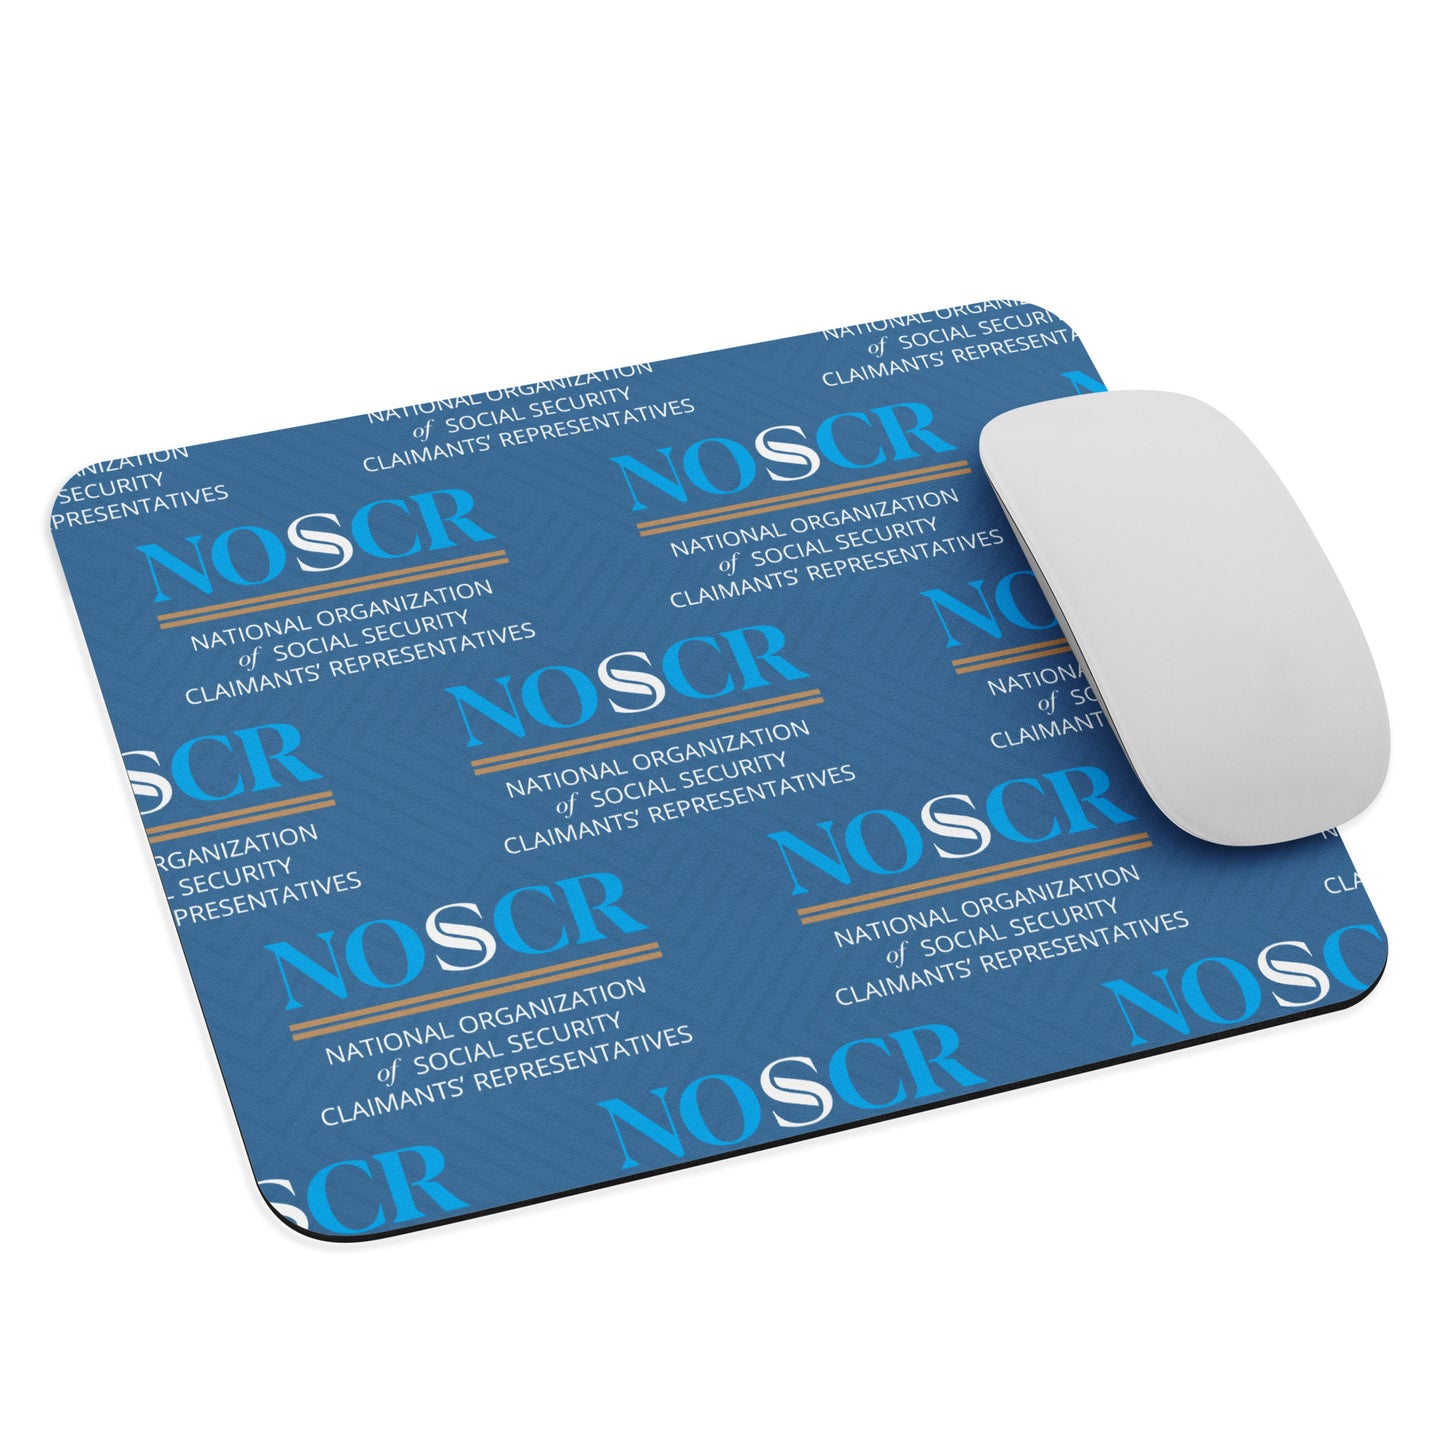 NOSSCR Pattern Blue Mouse pad